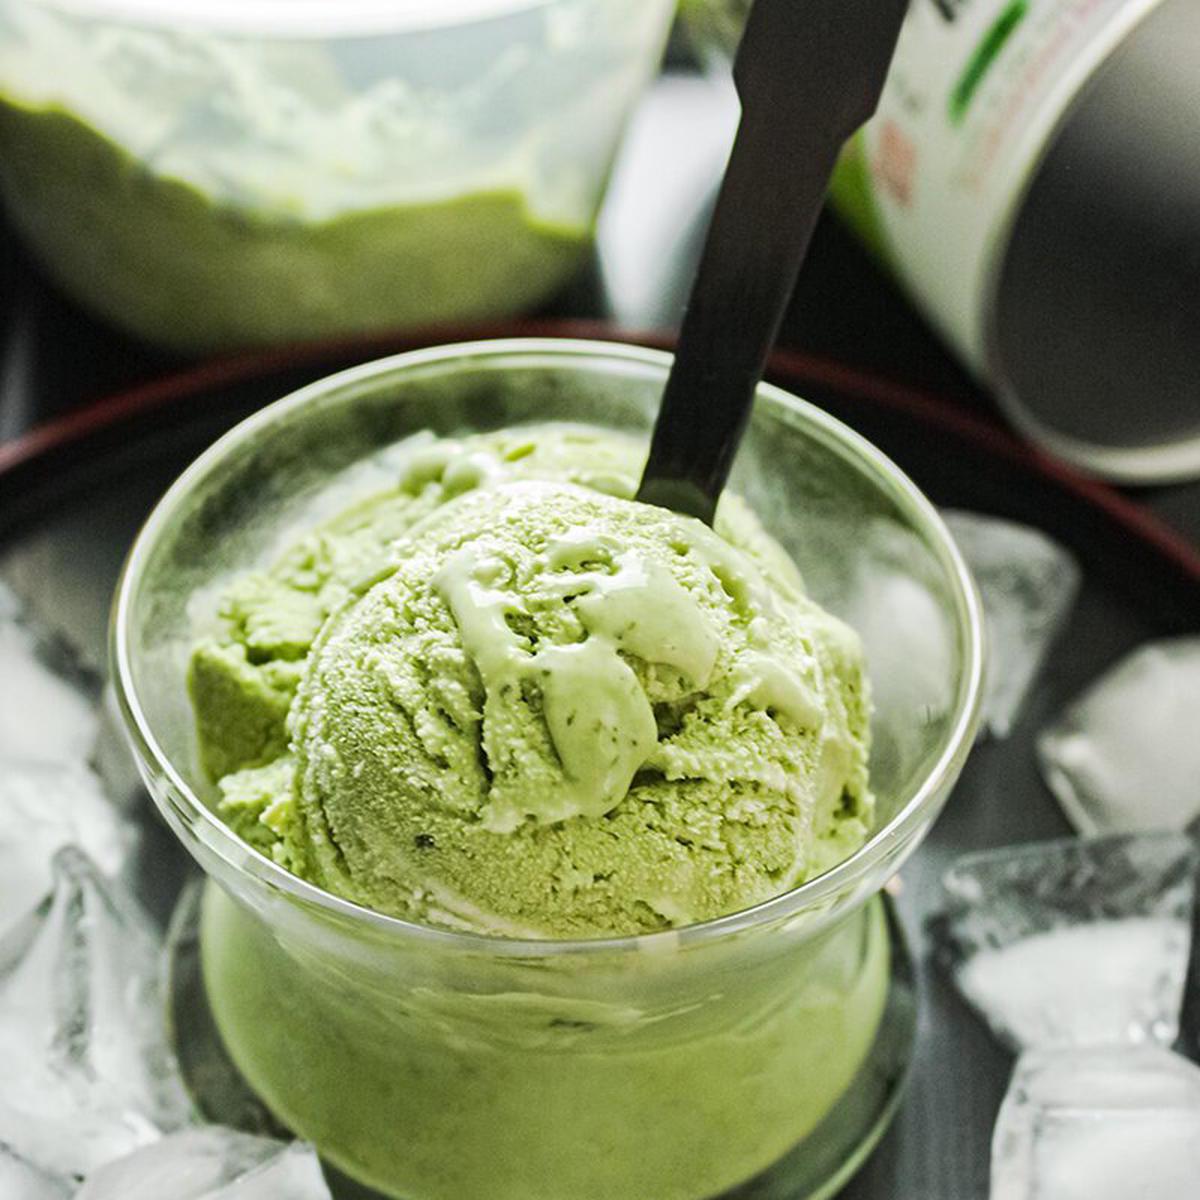 https://dailycookingquest.com/img/2014/05/matcha-ice-cream_hu38f2eb96387459cb8f4f0adf1fcbf2b0_148996_c8acbaafac8206743e6078f7f416cd56.jpg